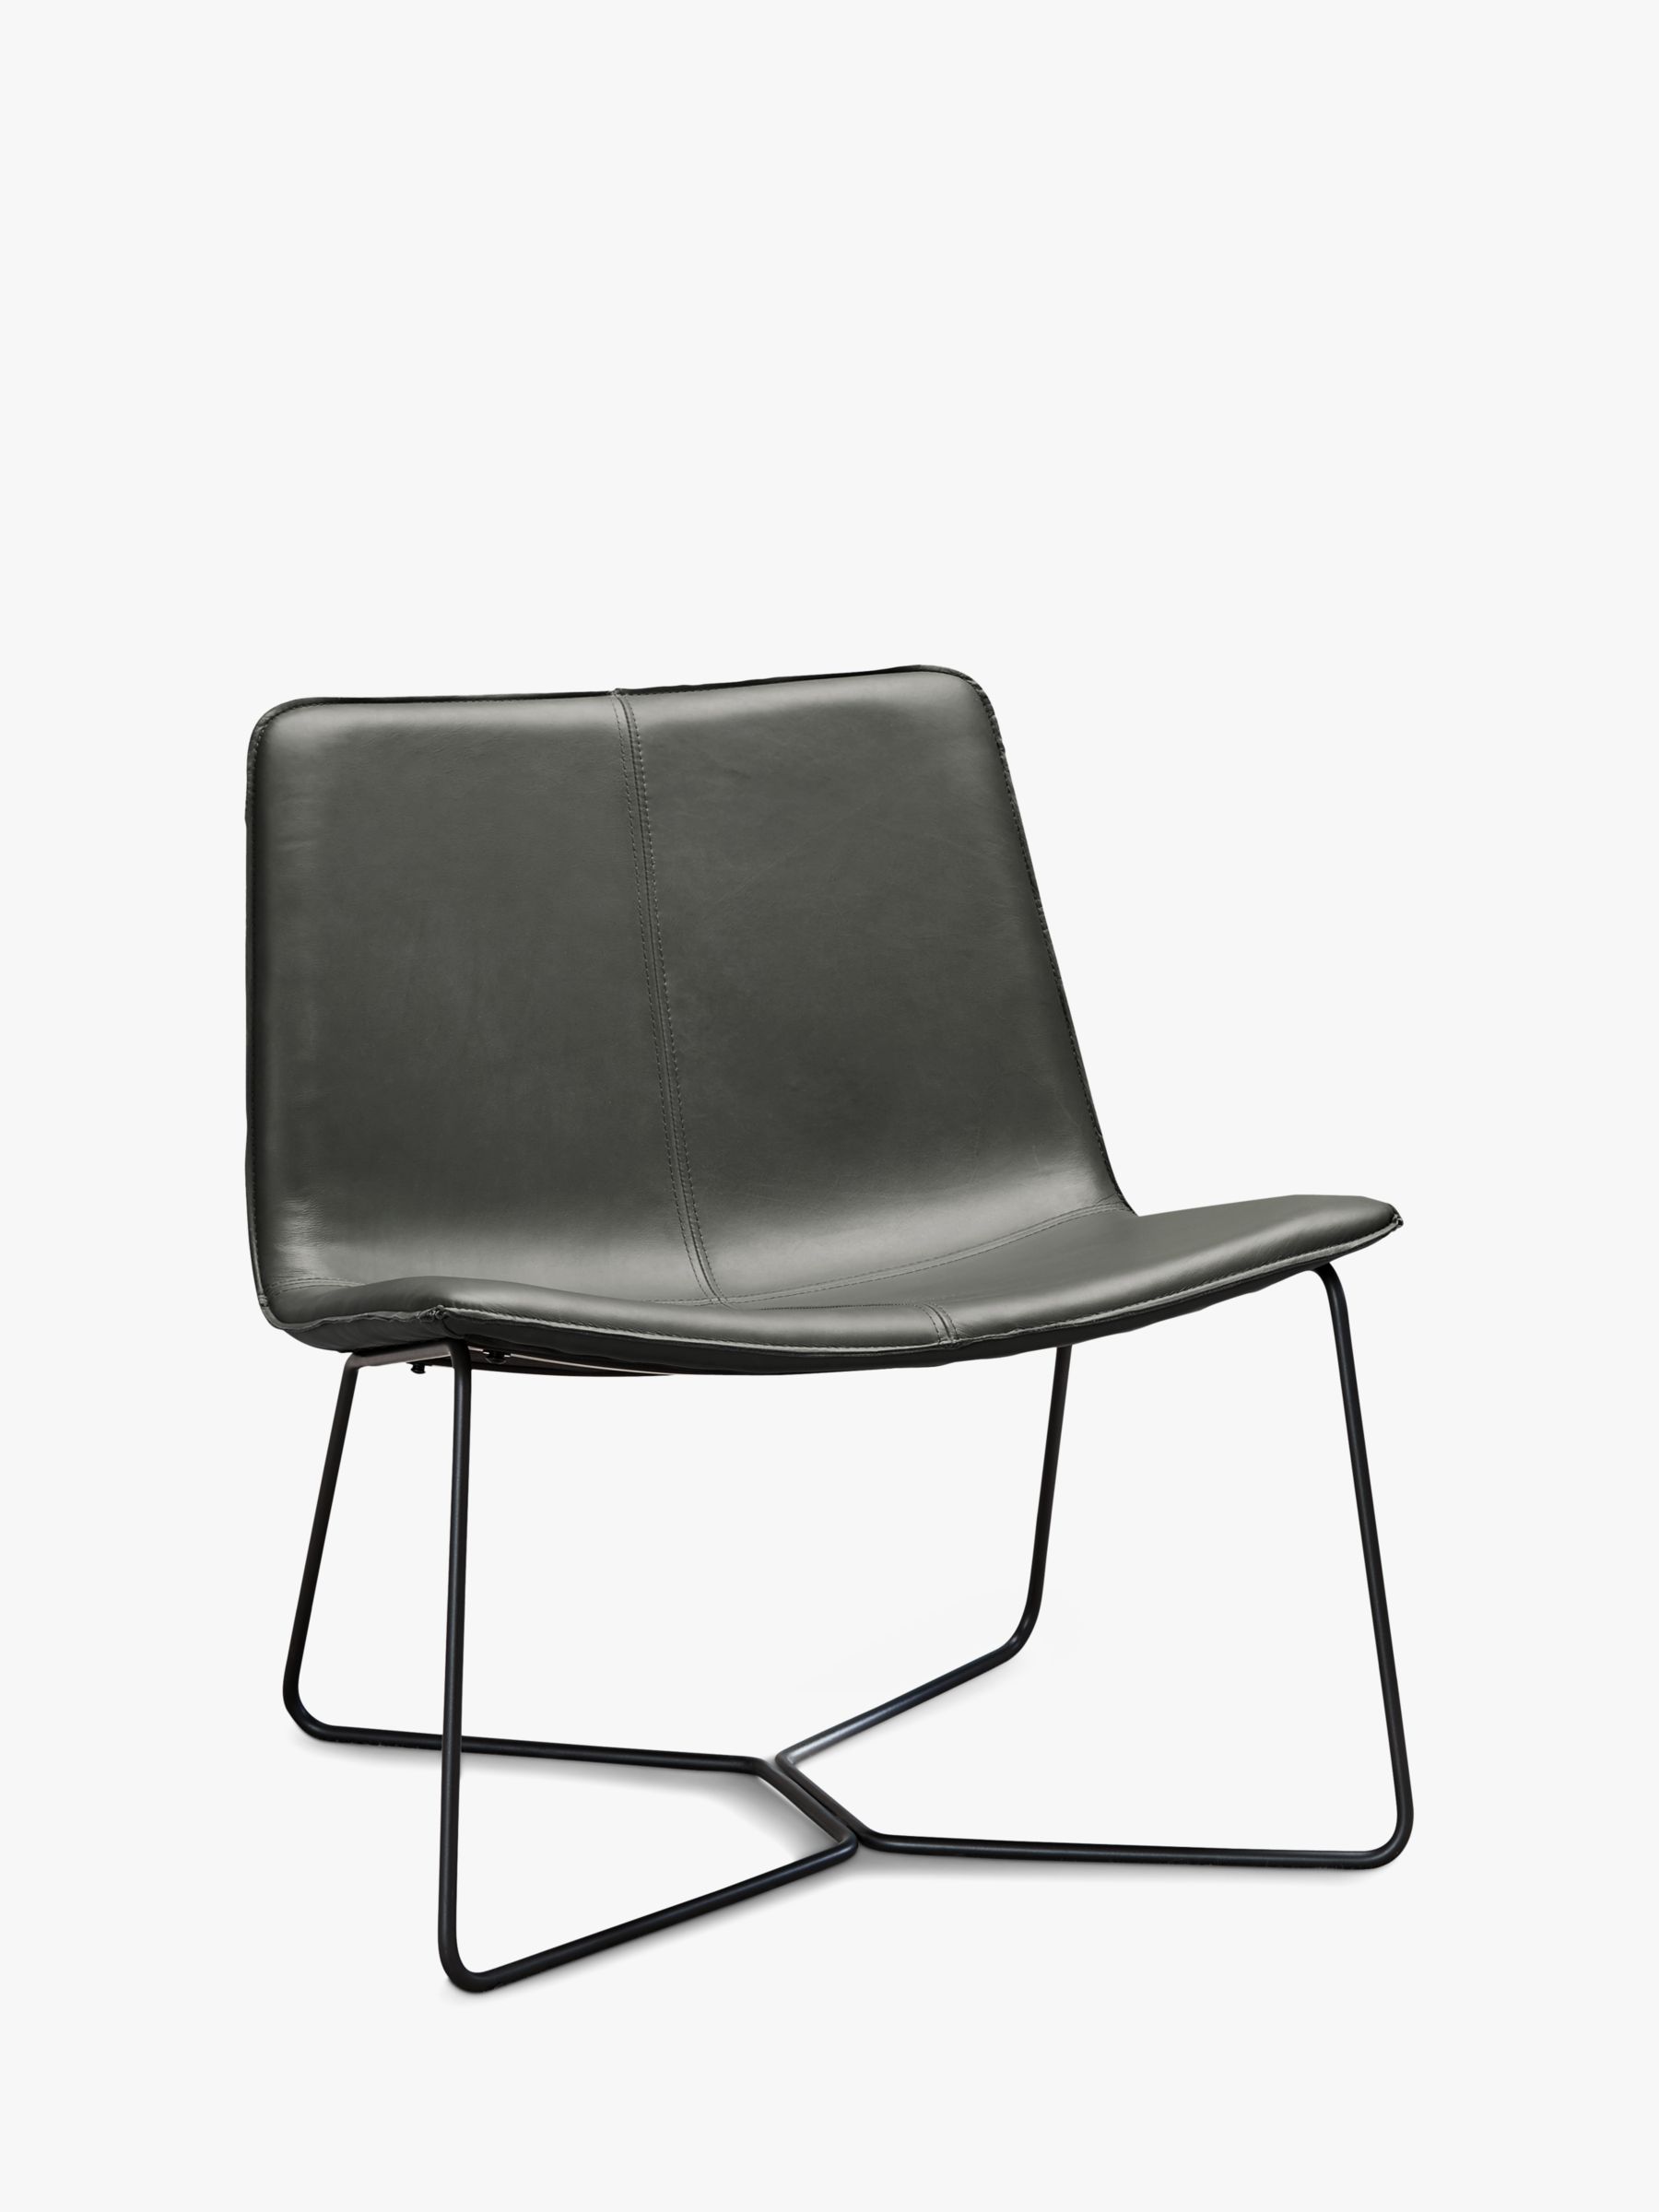 west elm Slope Lounge Chair, Fog Leather at John Lewis & Partners